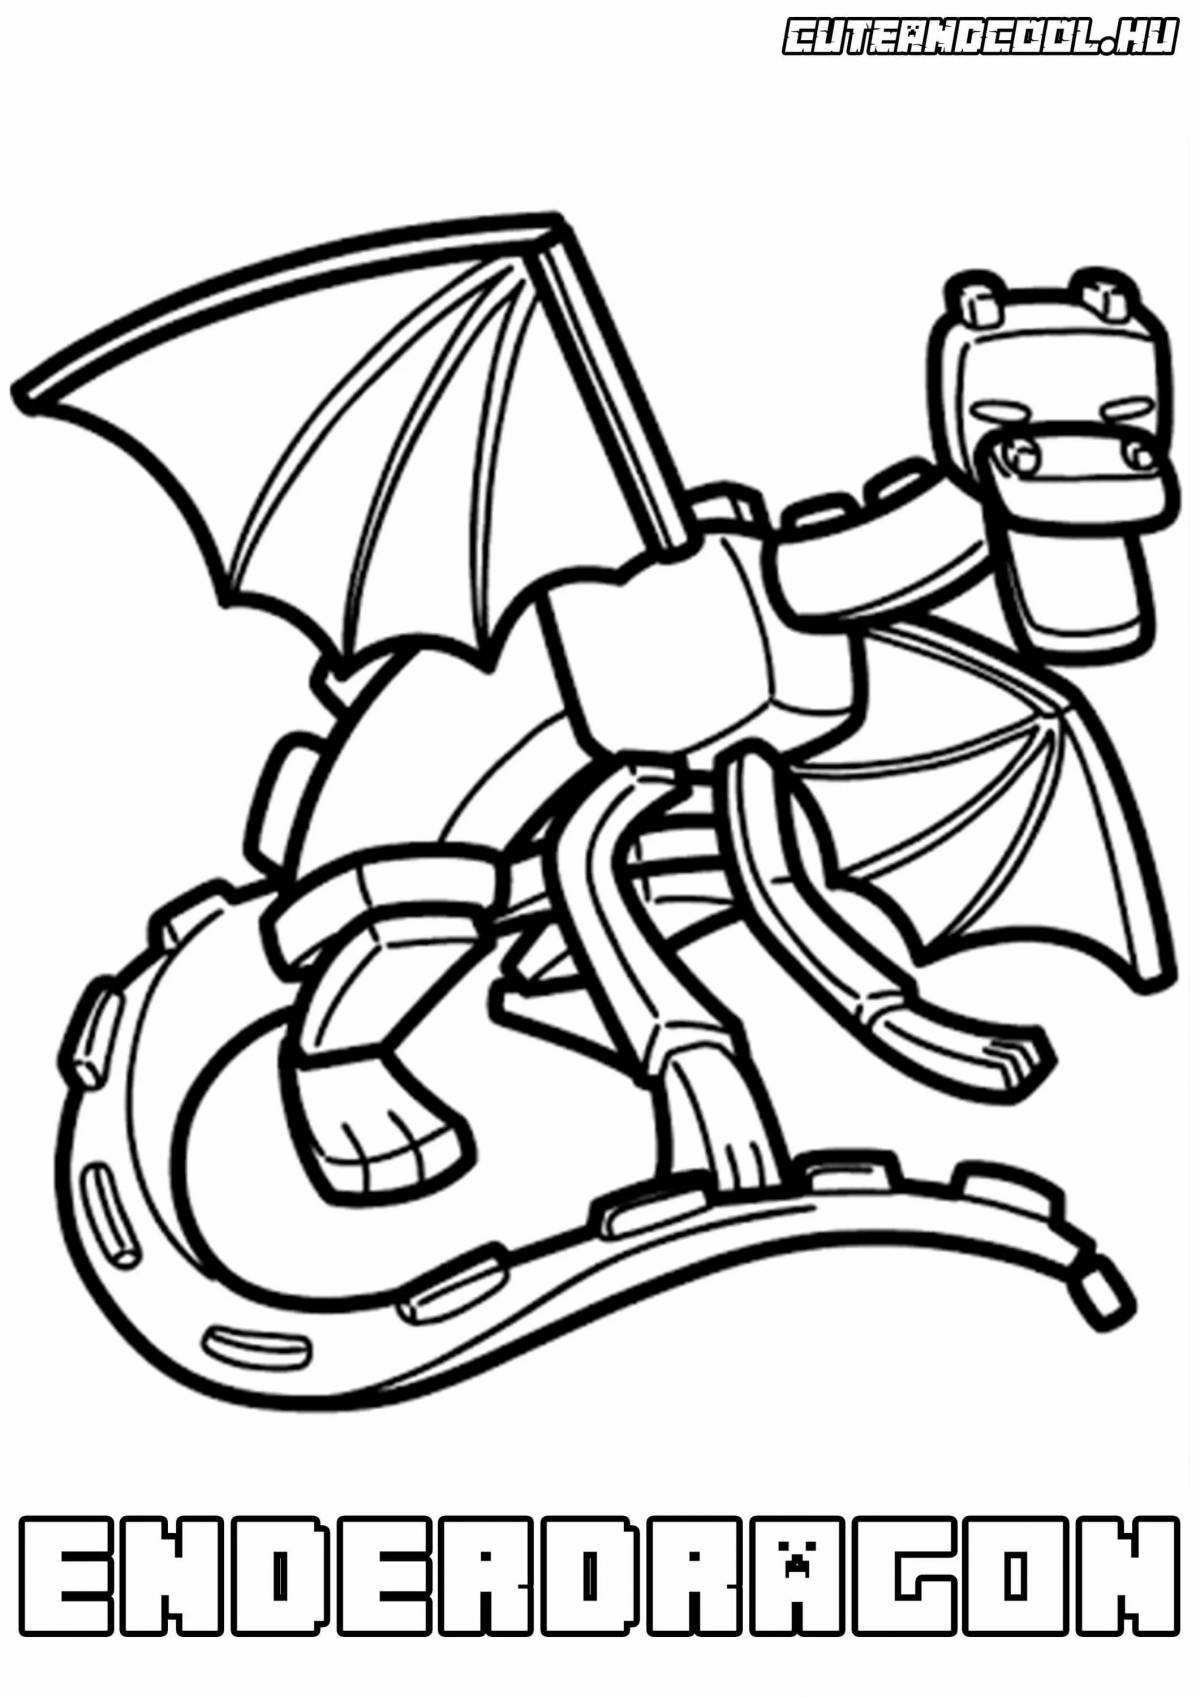 Gorgeous minecraft ender dragon coloring page